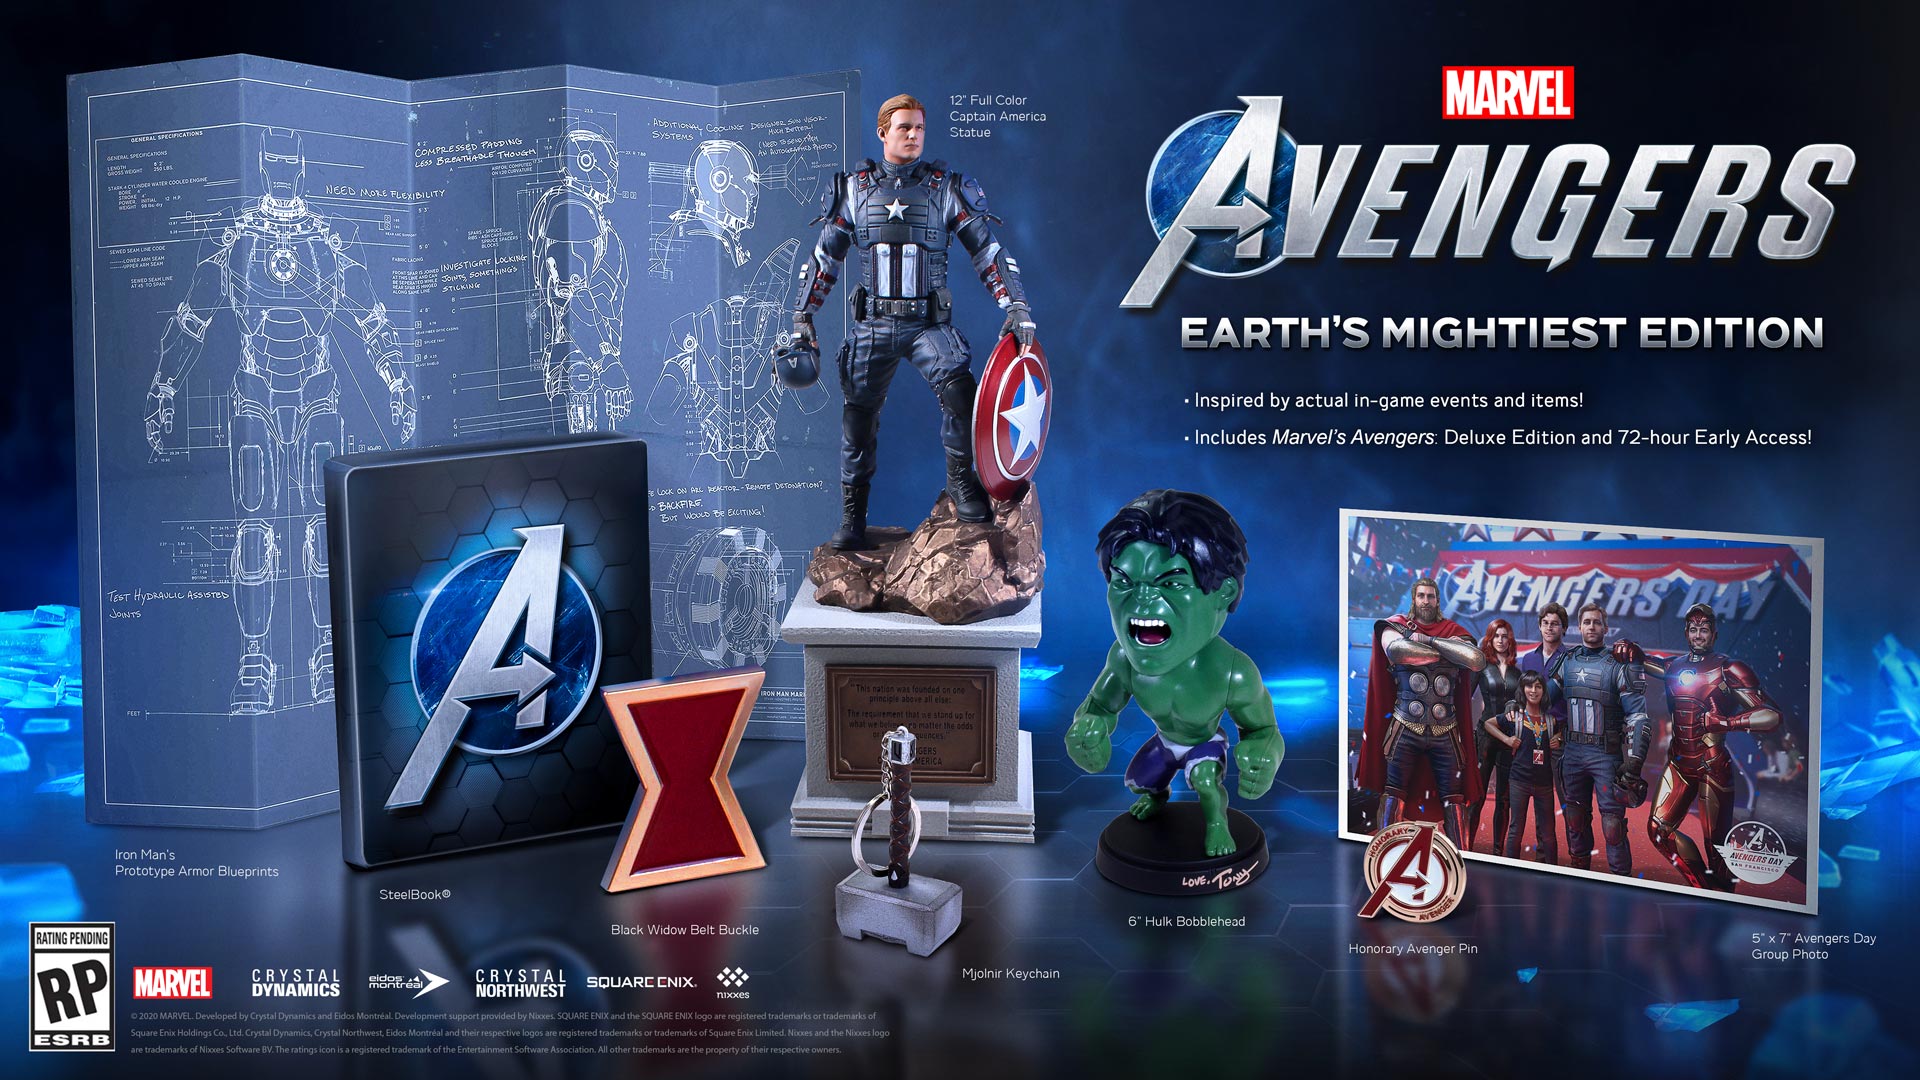 Marvel's Avengers Earth's Mightiest Edition